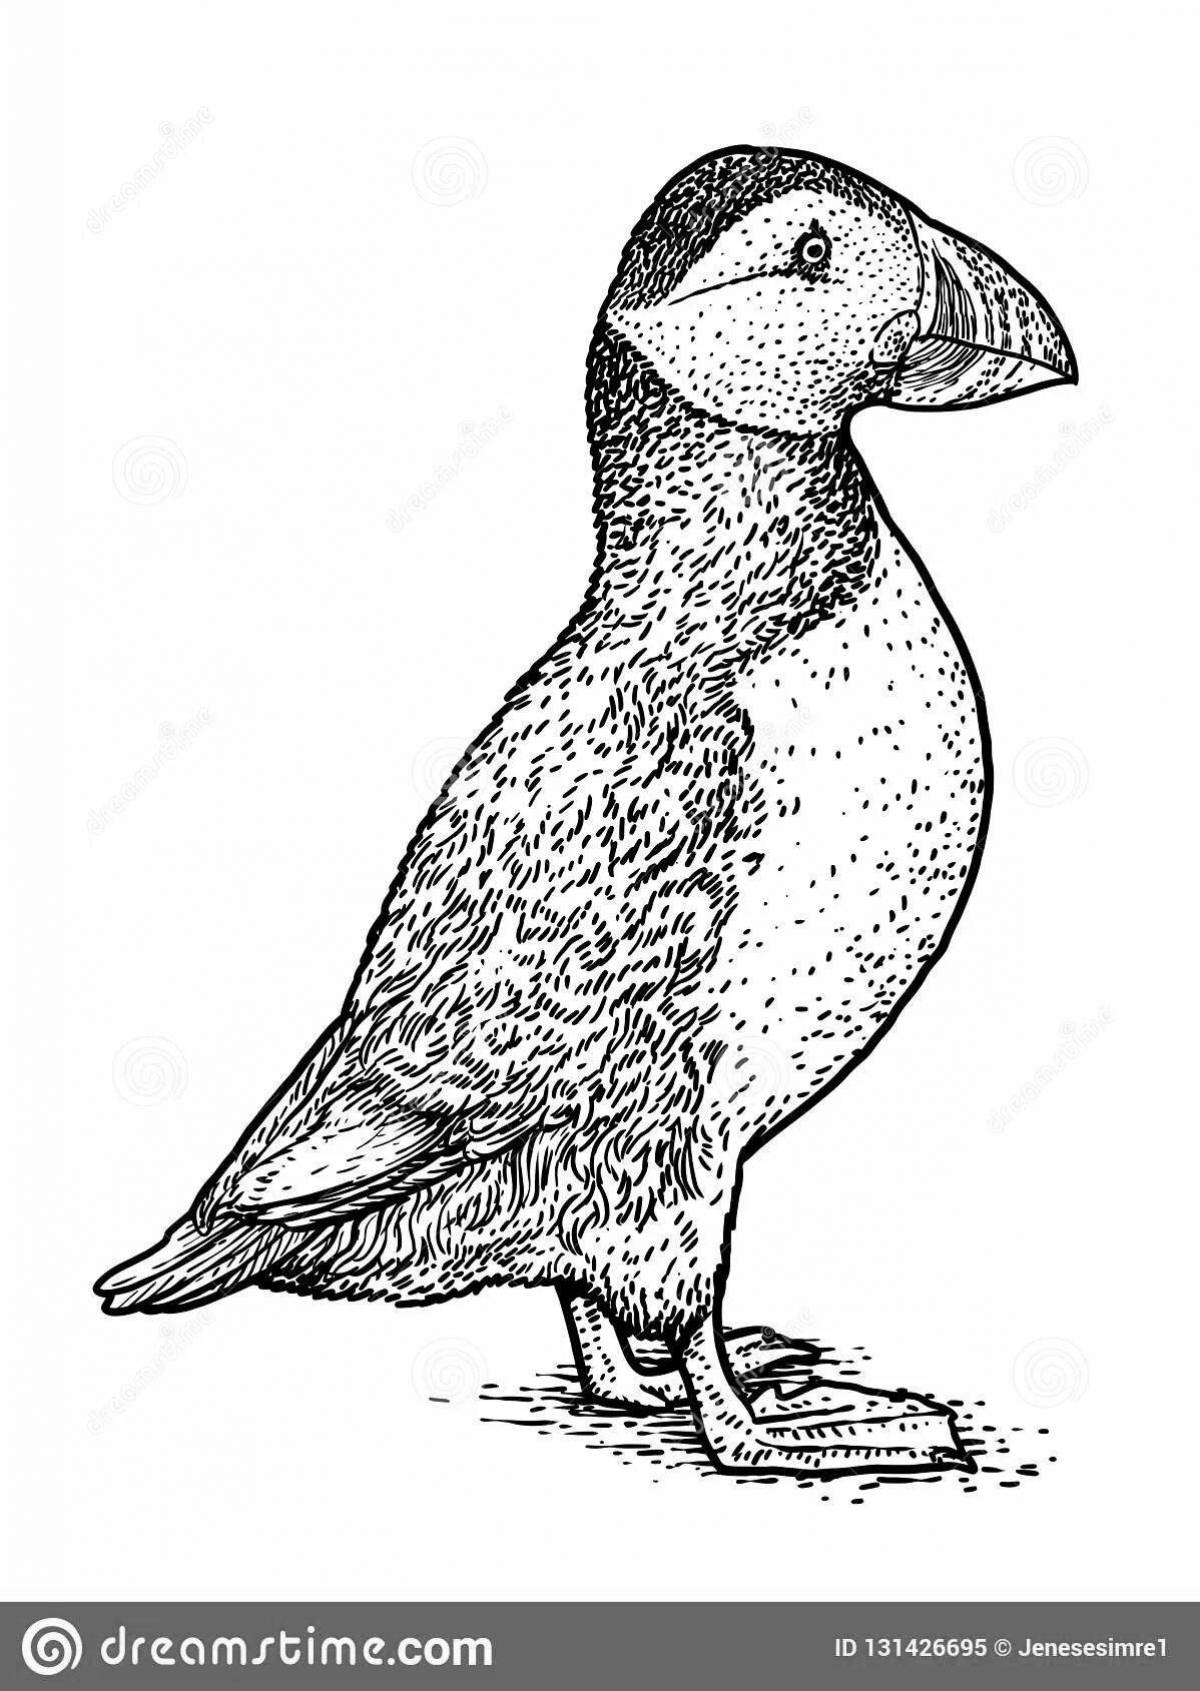 Coloring page elegant puffin bird